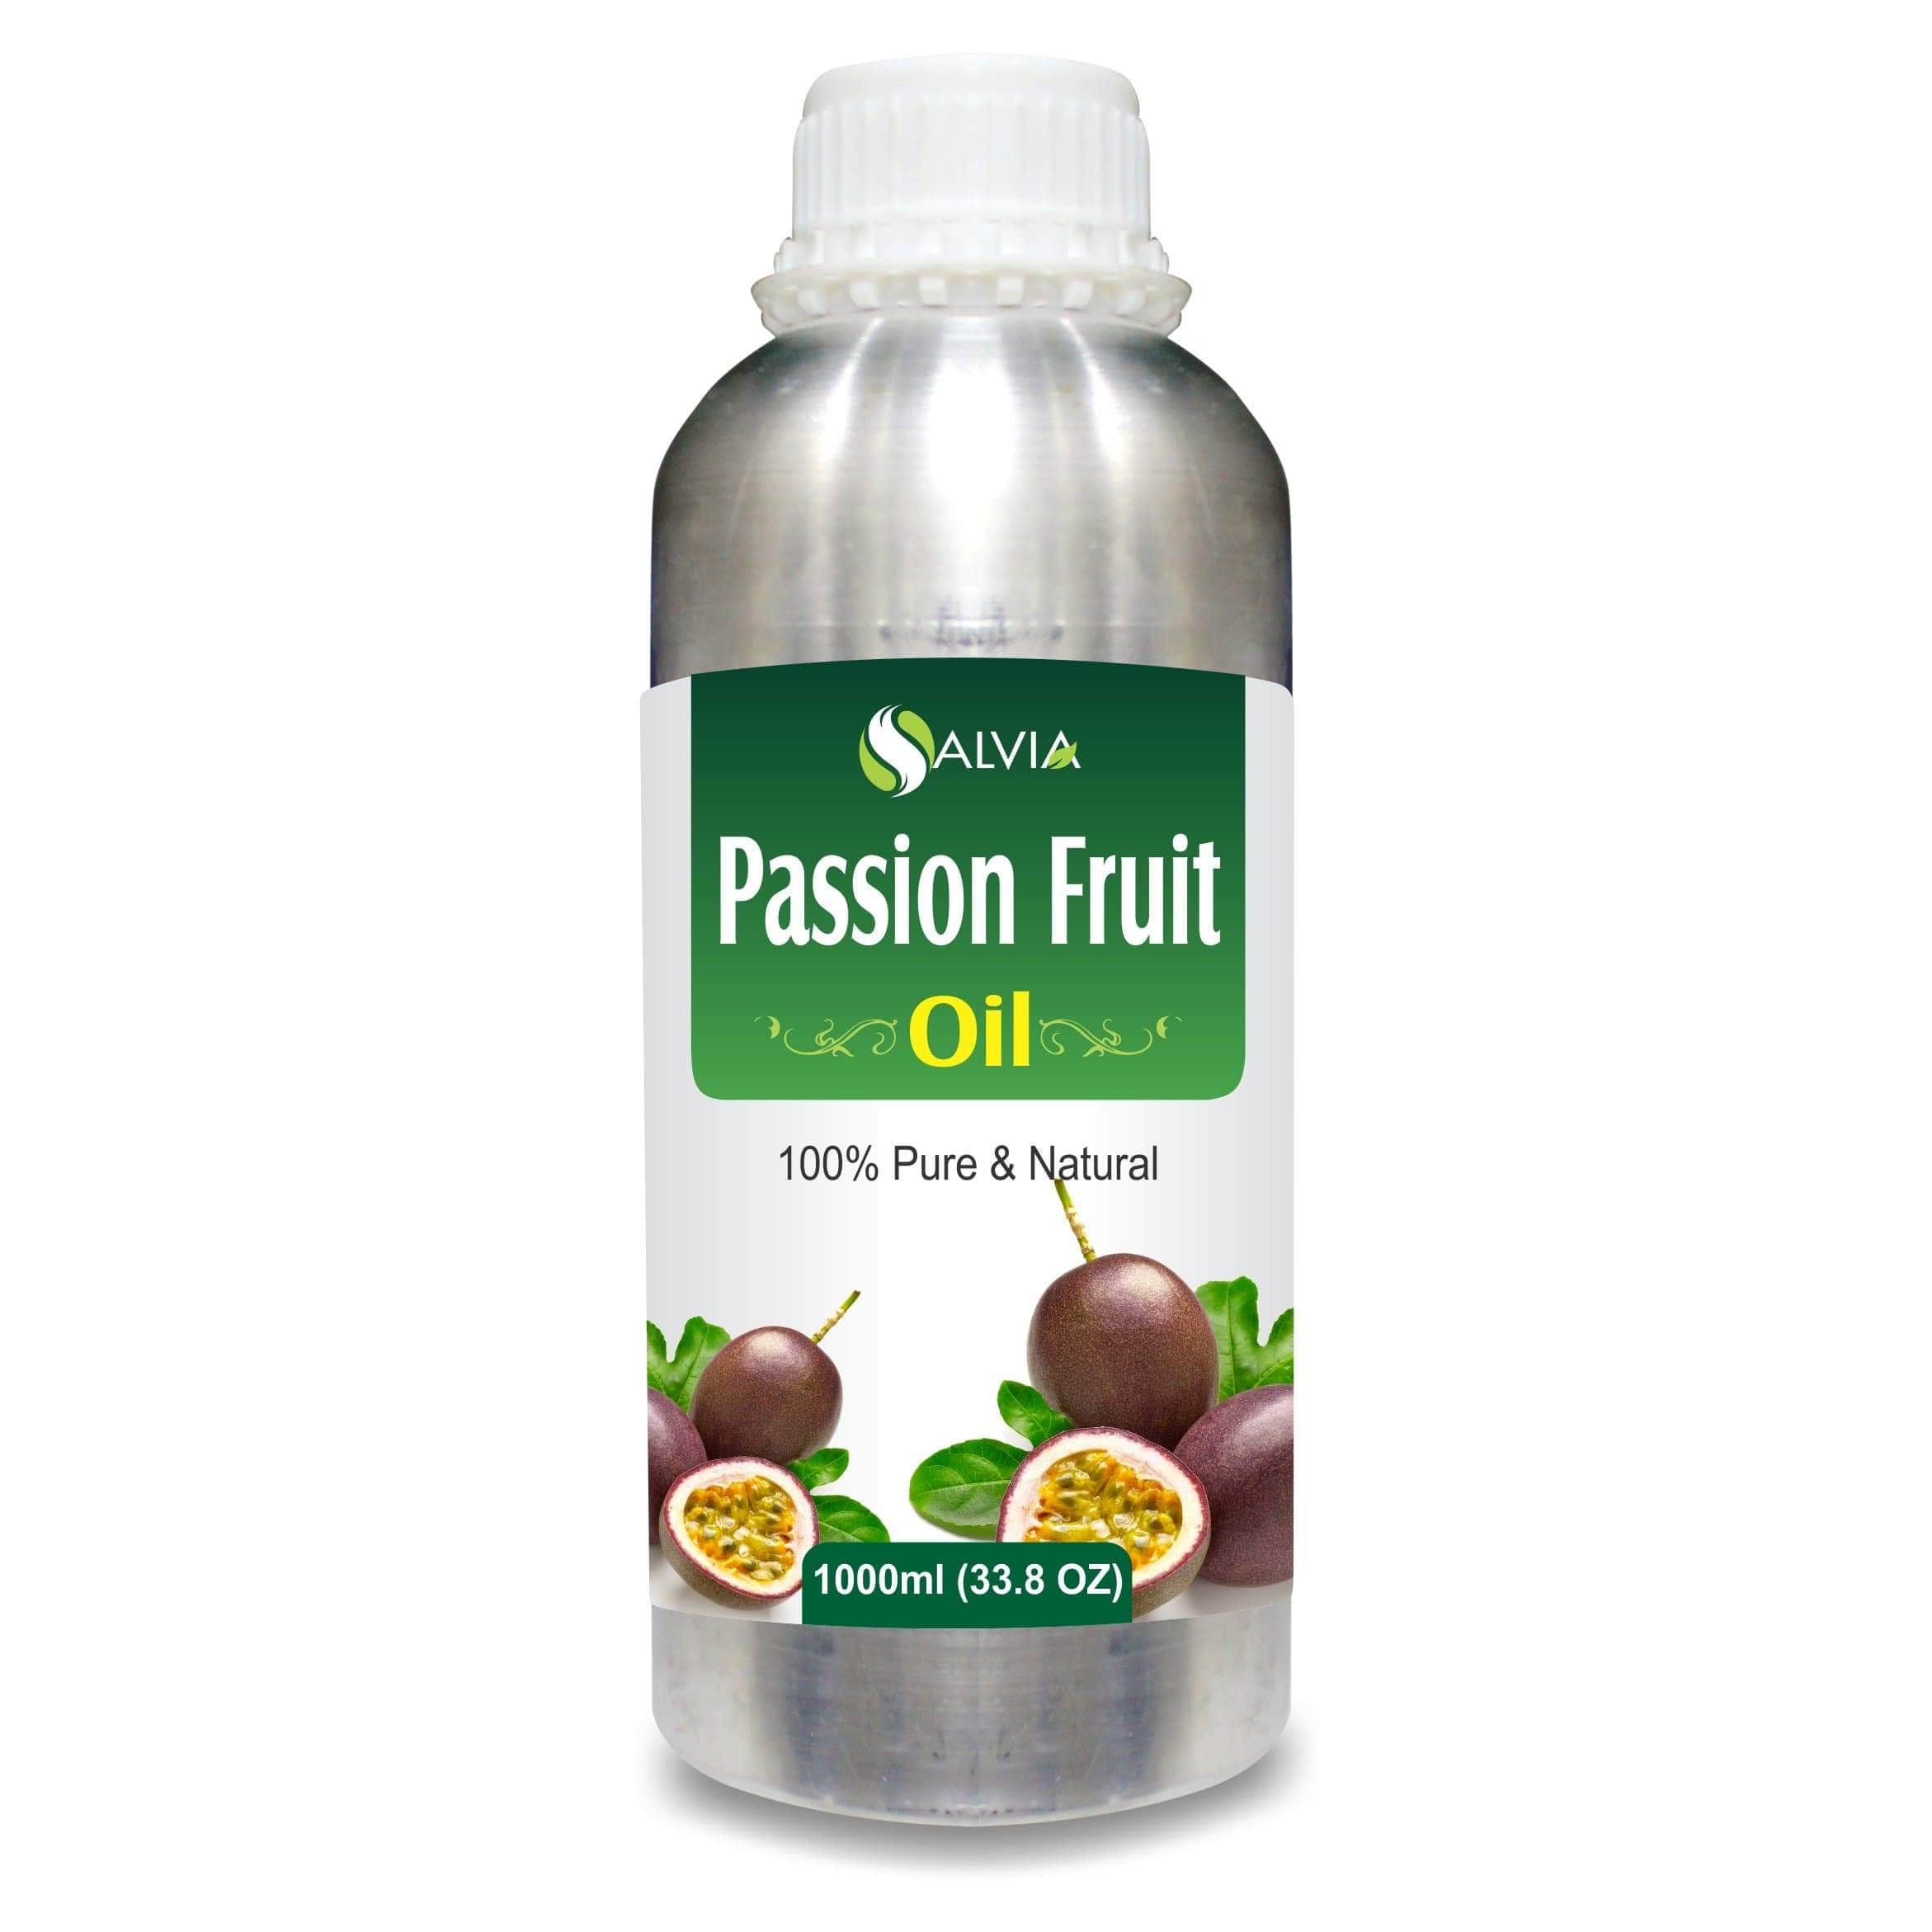 Passion Fruit oil for hair